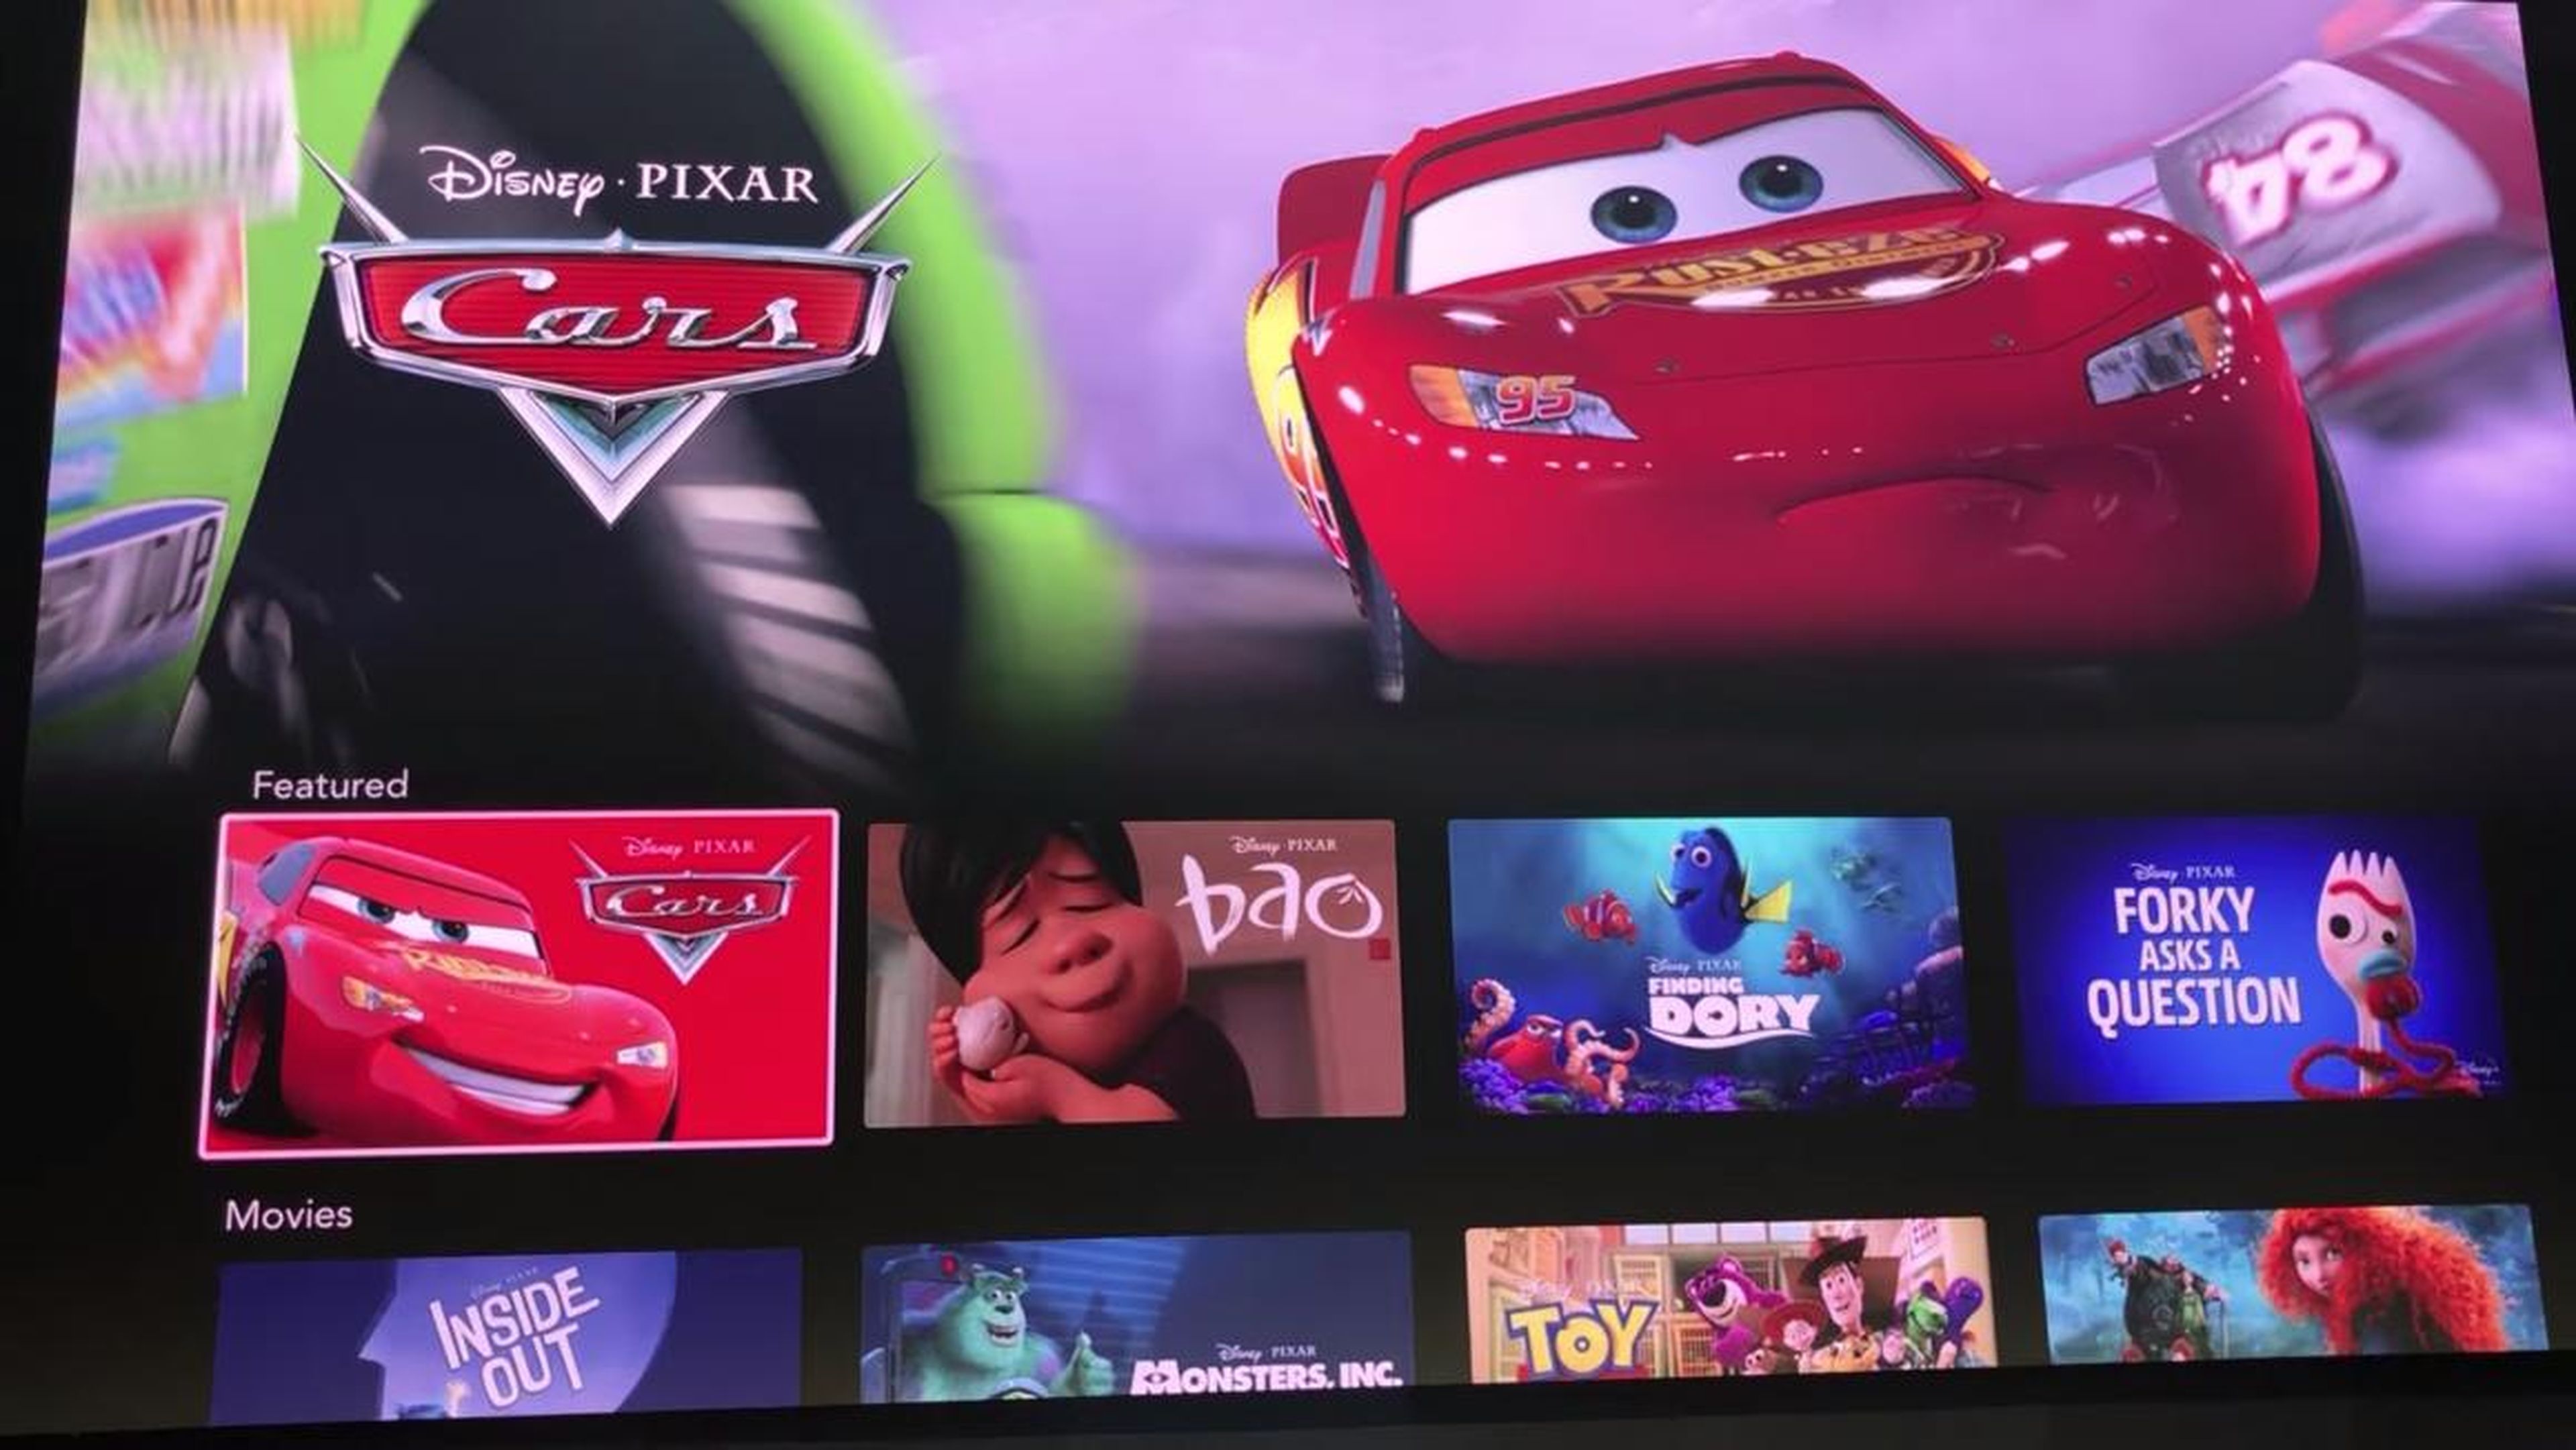 Similarly, we saw that Pixar would have almost every piece of content it's ever made available on Disney Plus, from features like "Inside Out" to shorts like "Bao" and original series like "Forky Asks A Question."